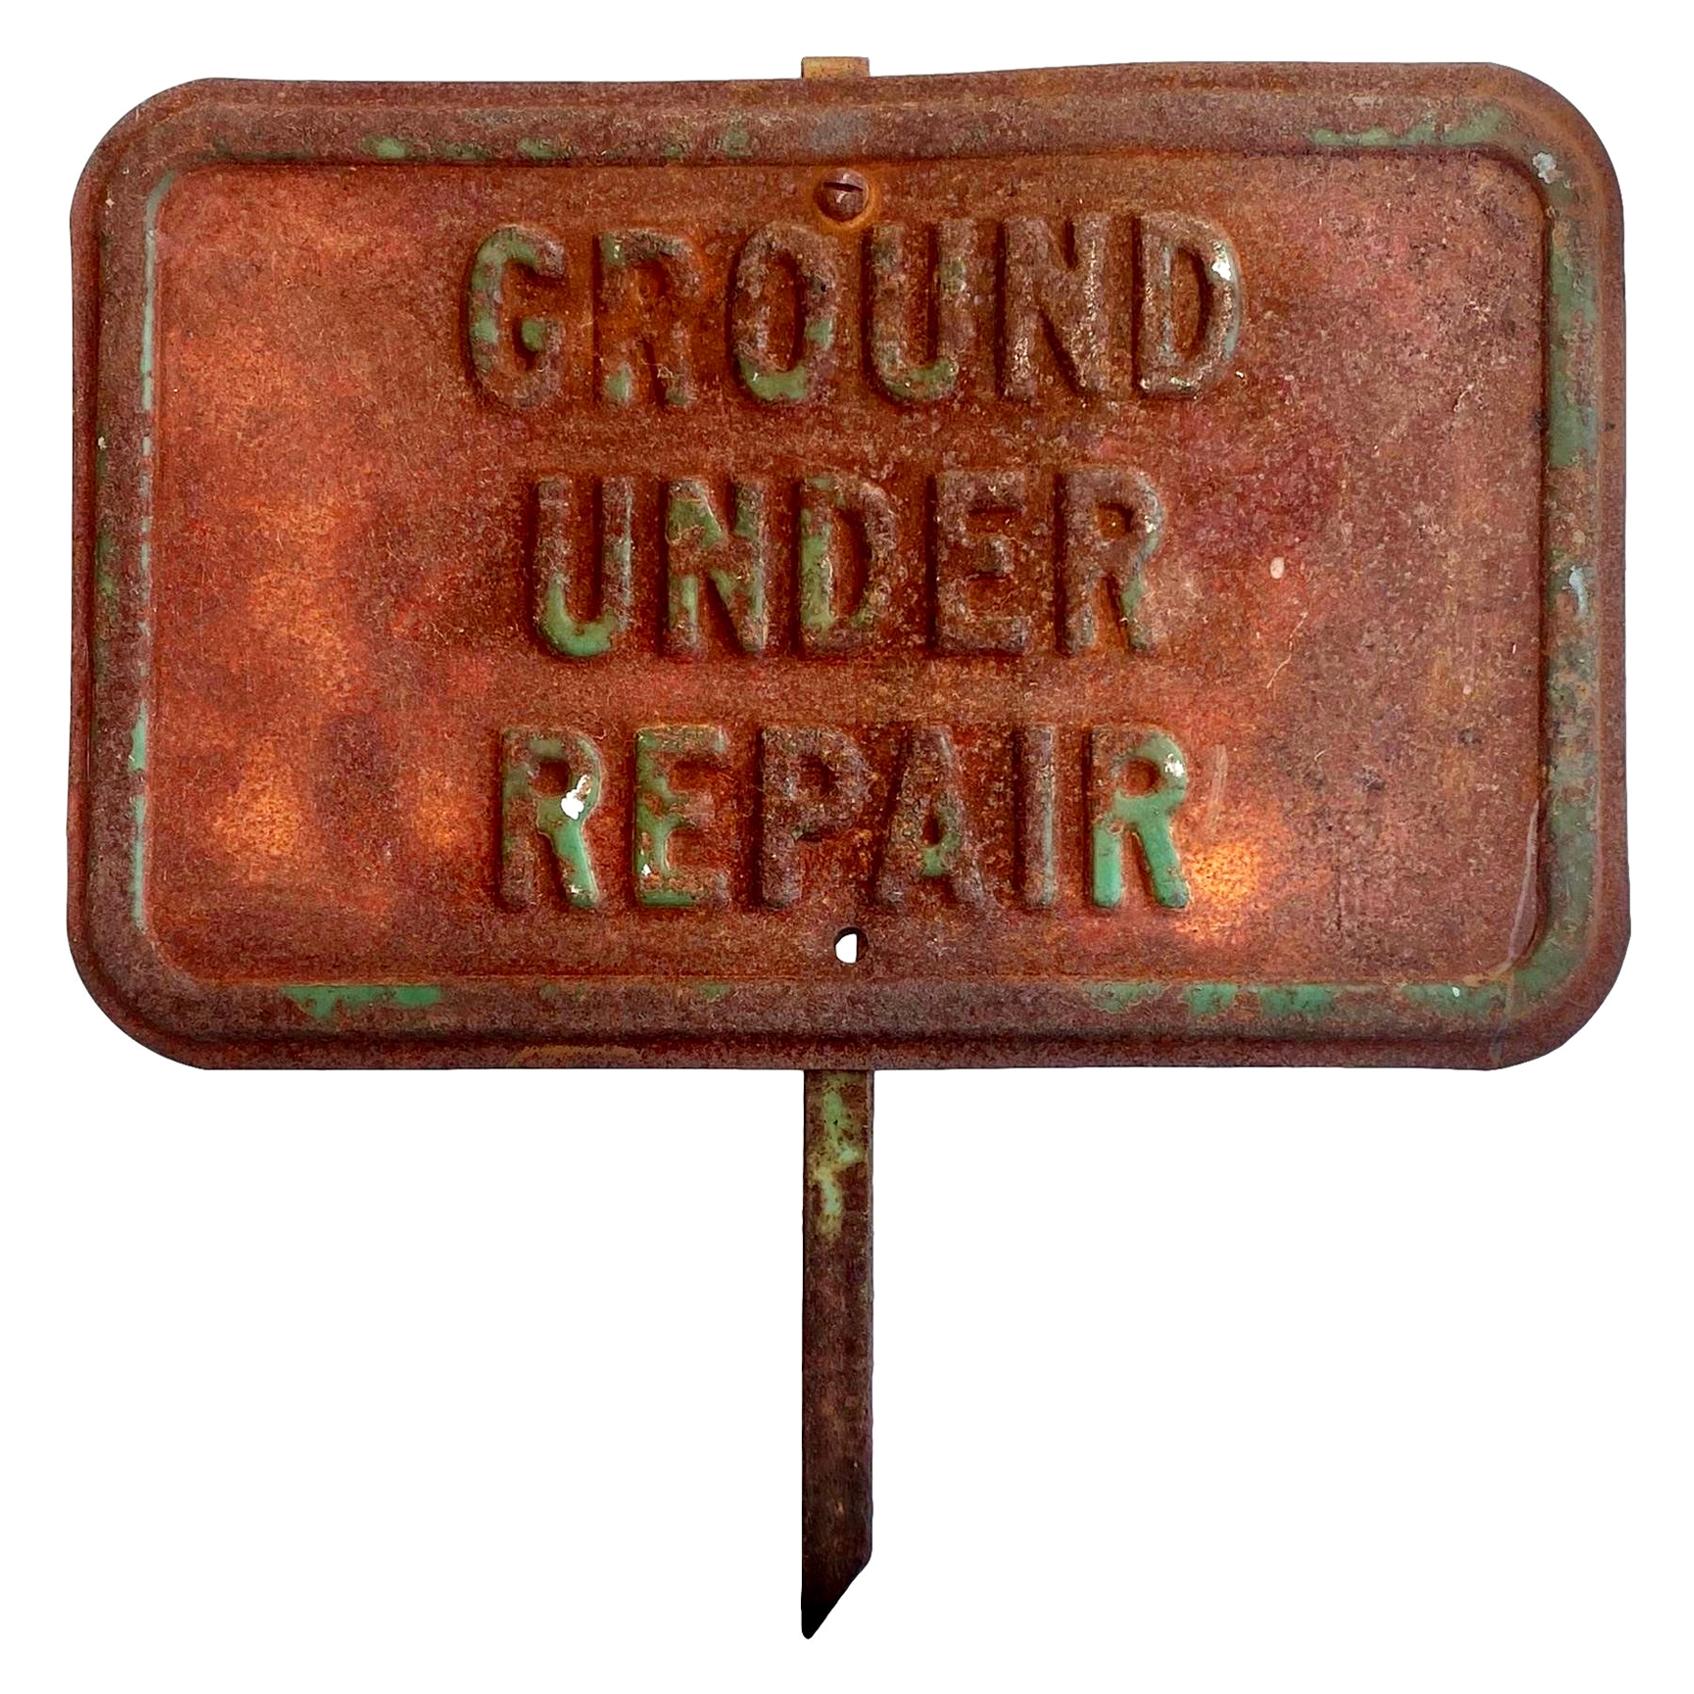 Ground Under Repair Staked Sign